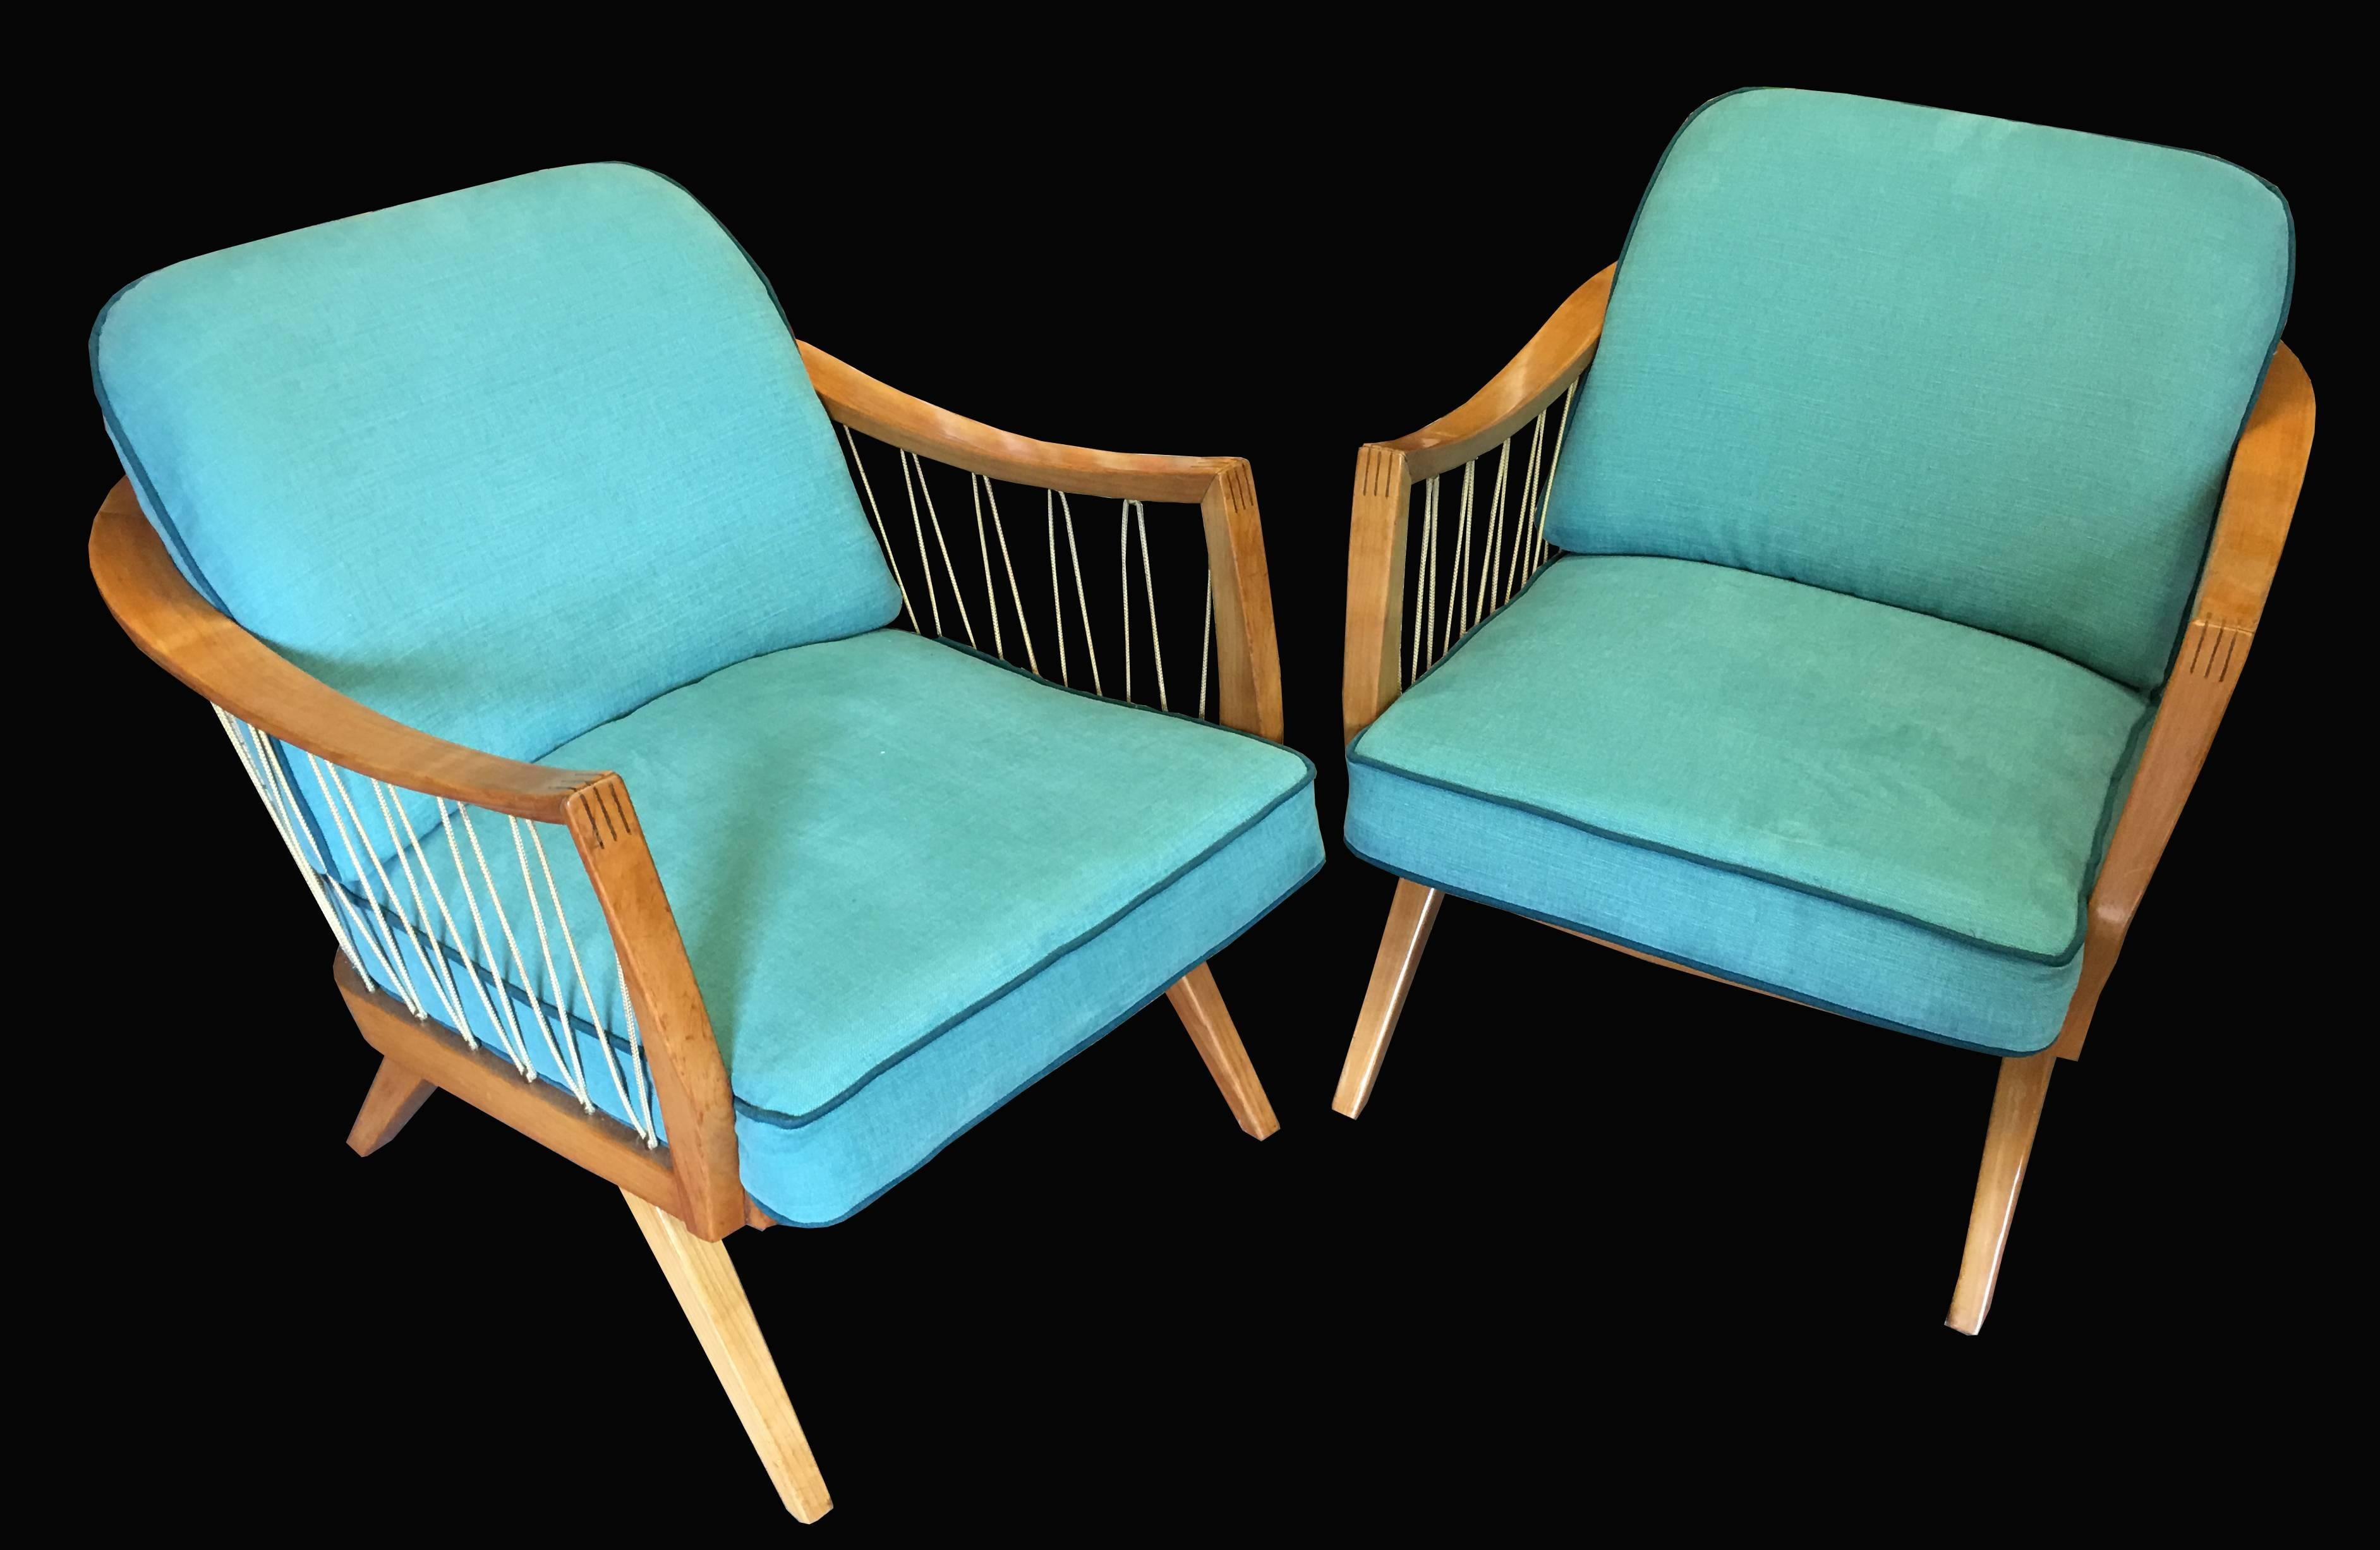 A fabulous pair of generous proportion lounge chairs, very unusual design, and quite probably unique!
In great condition and with new upholstery.